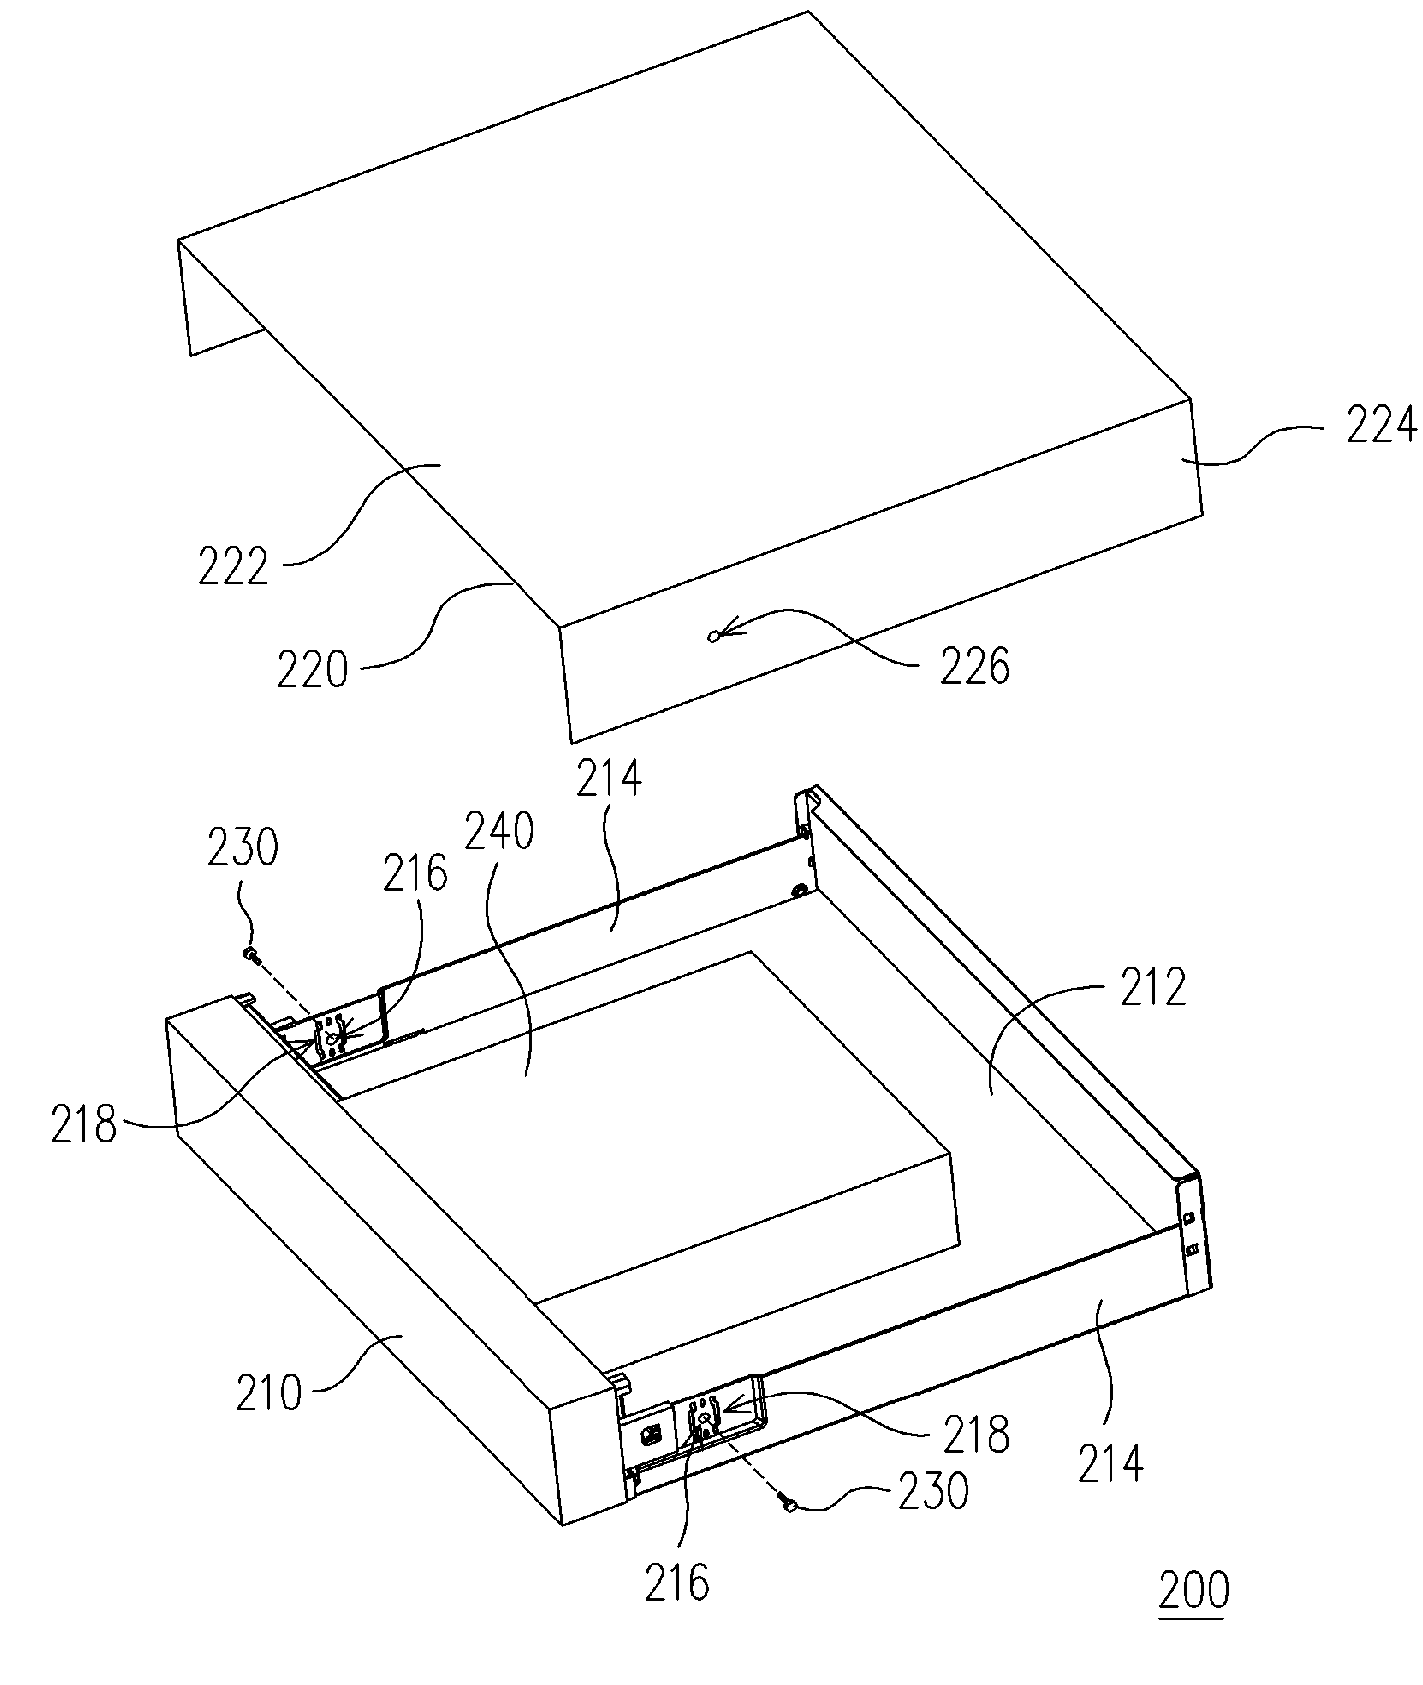 Optical disc drive and housing of an electronic device